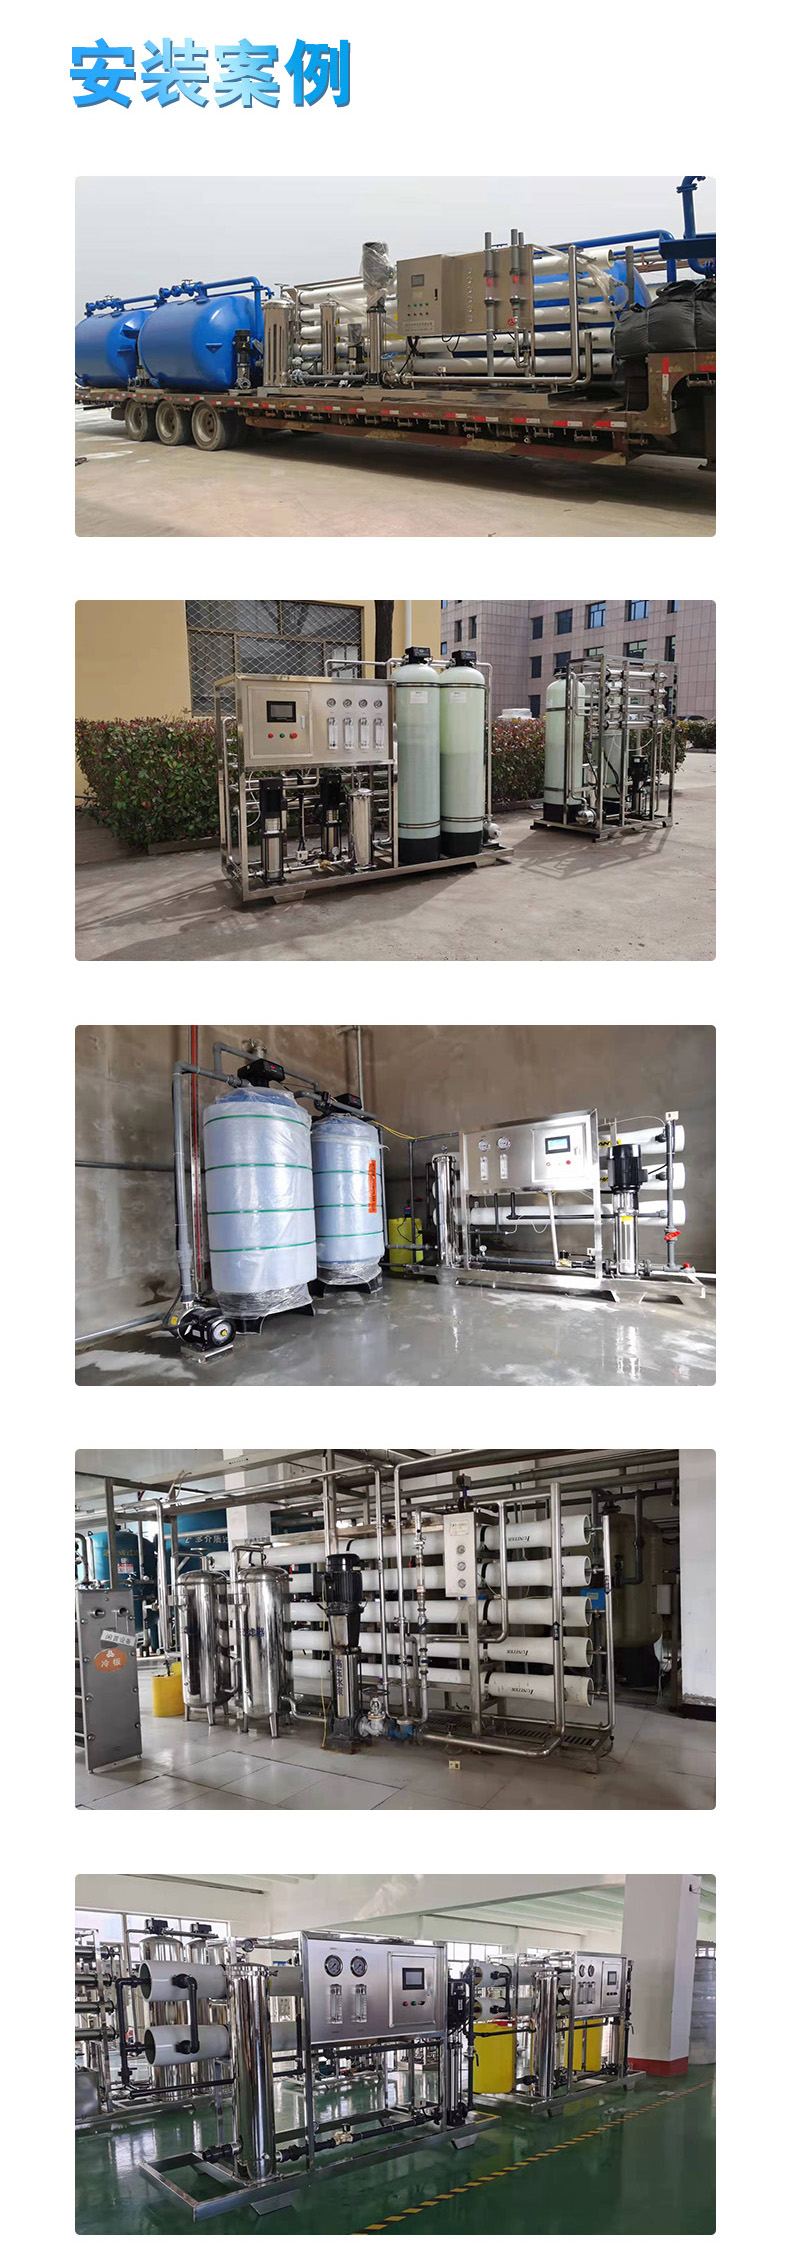 New Rural Direct Drinking Water Equipment 3-ton Reverse Osmosis Equipment Manufacturer Large Water Treatment Equipment